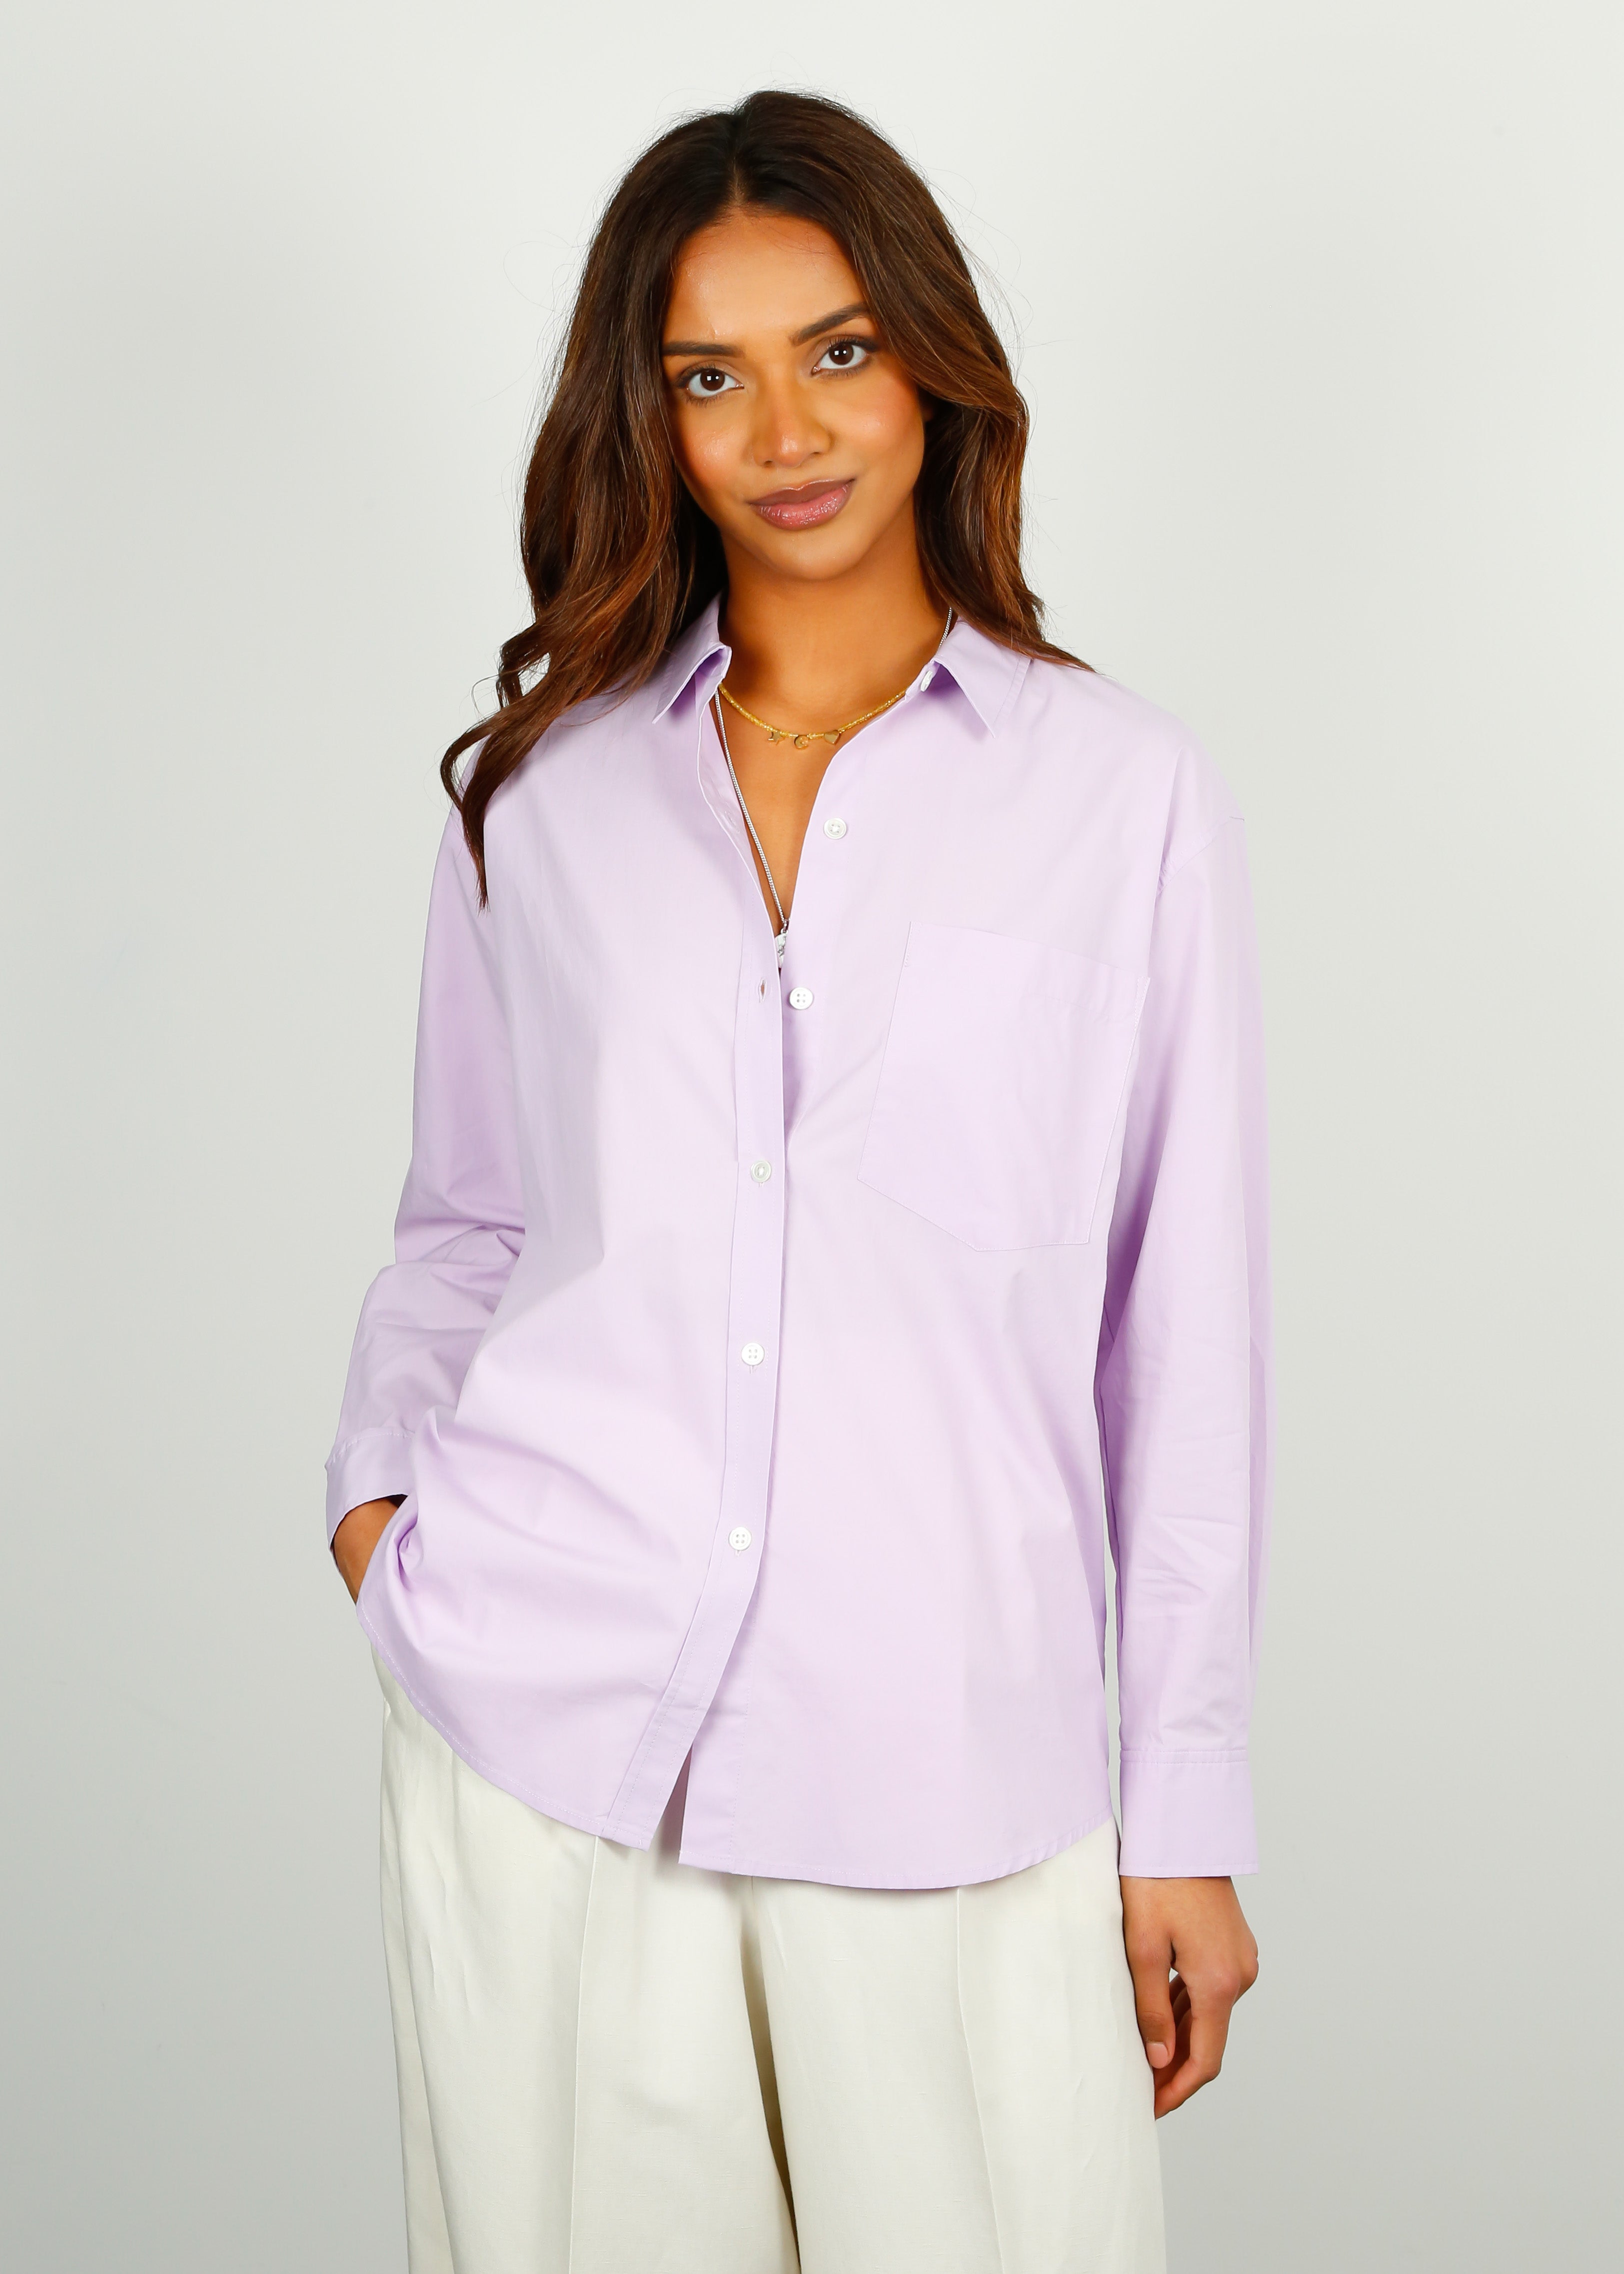 RAILS Arlo Shirt in Orchid